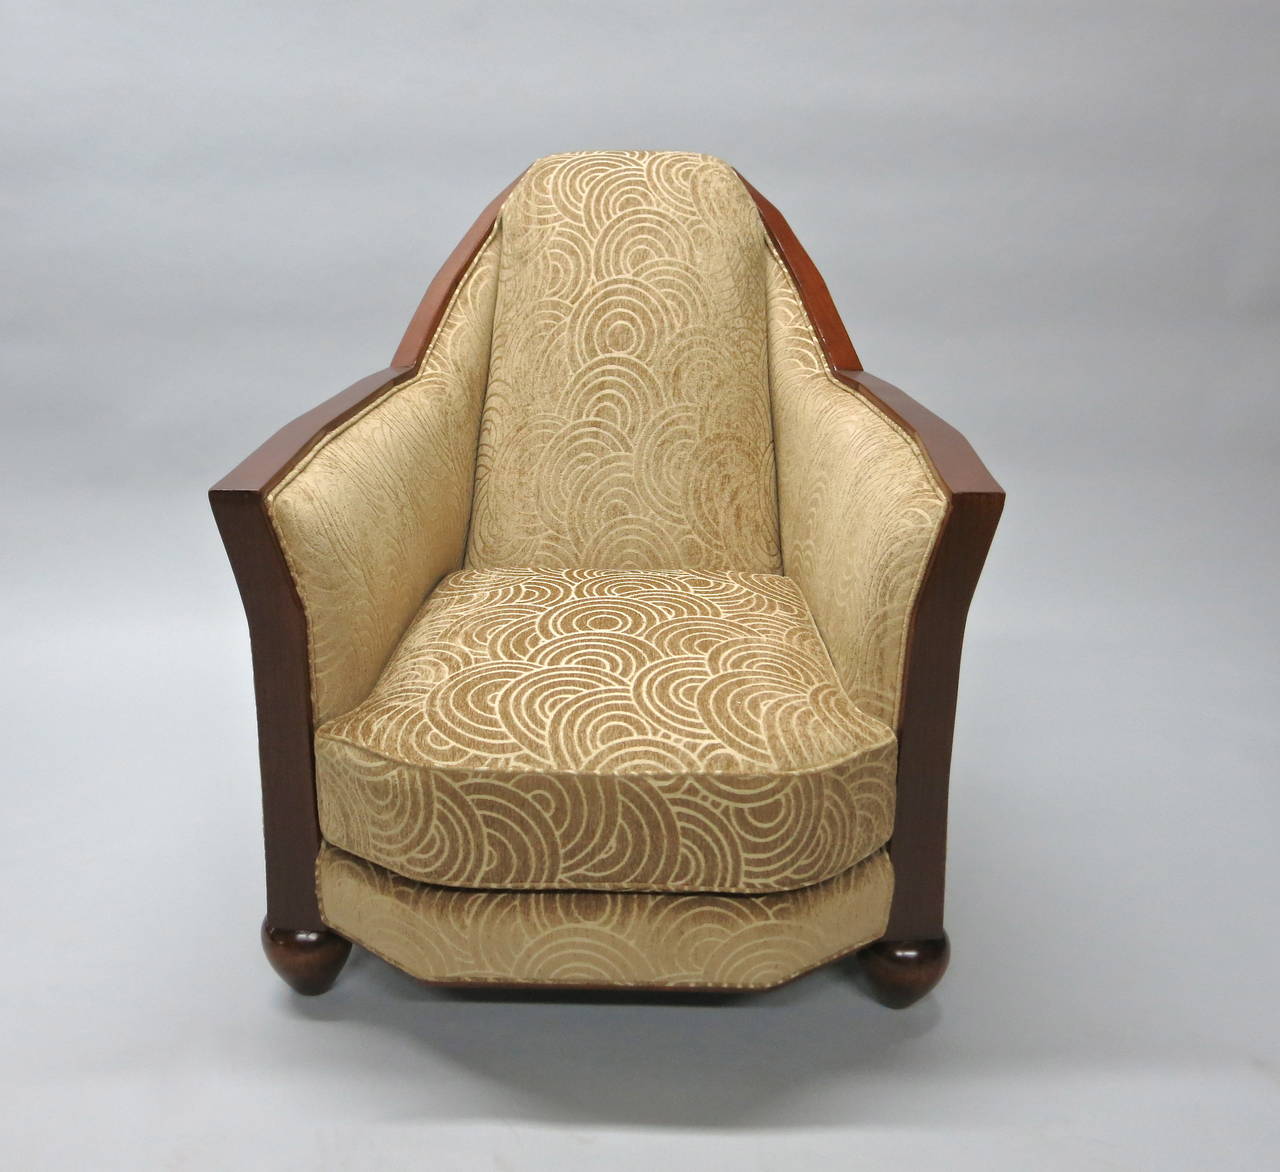 Early 20th century Art Deco wood trimmed chair with two rounded legs in the front, recently reupholstered and refinished.